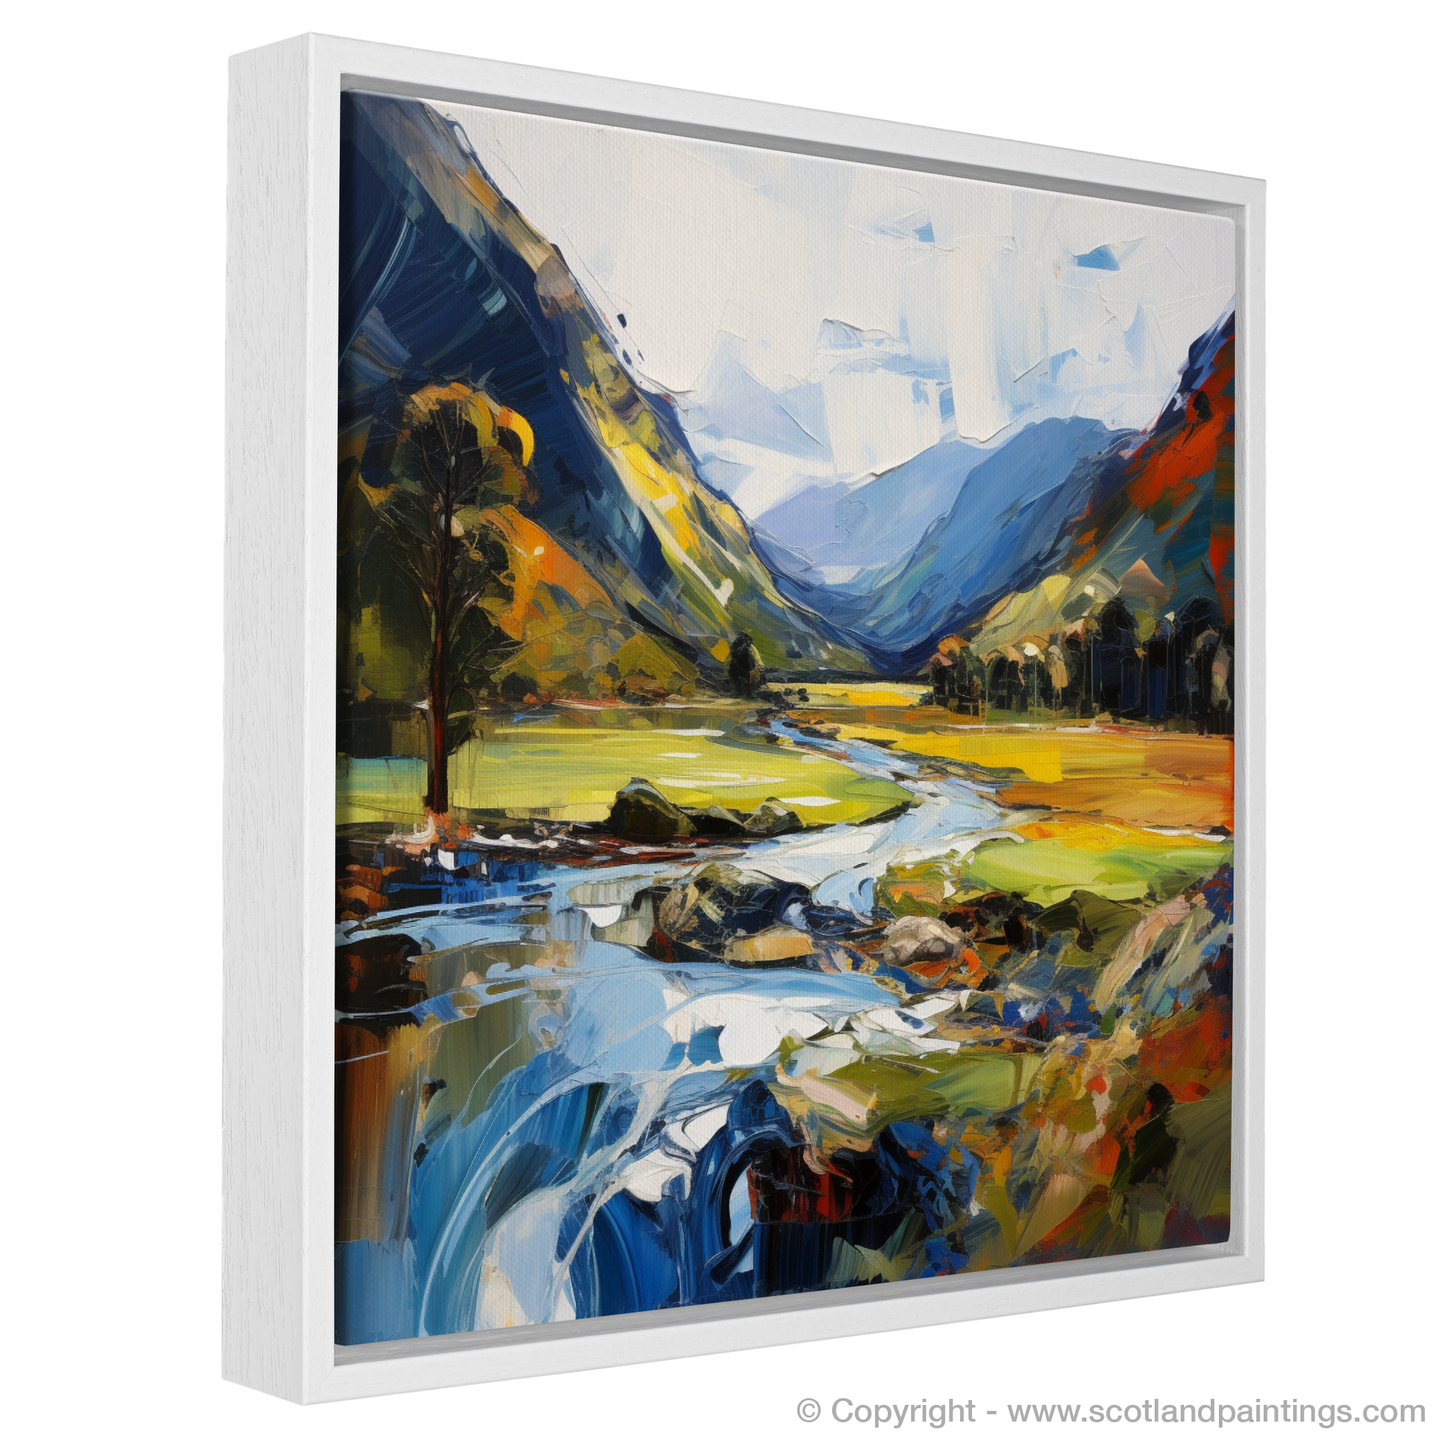 Painting and Art Print of Glen Lyon, Perthshire entitled "Glen Lyon Unleashed: An Expressionist Journey Through the Scottish Wilderness".